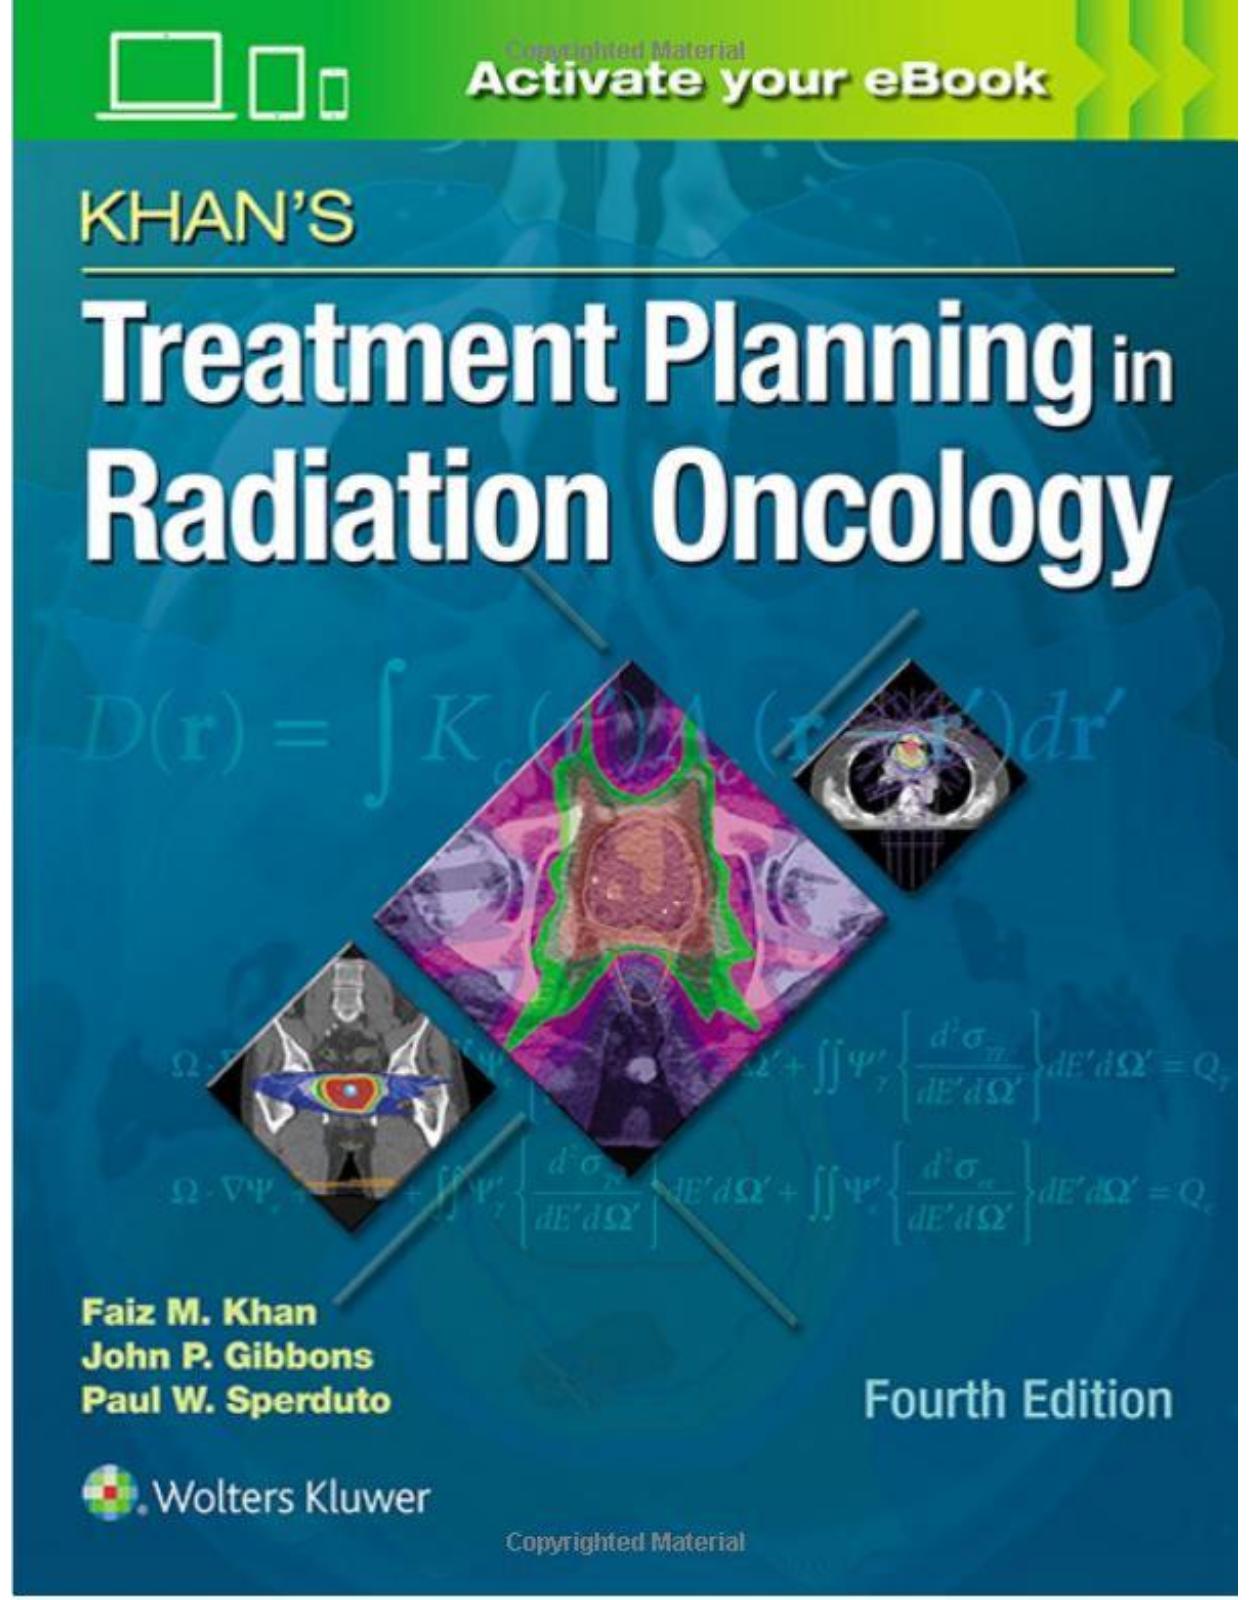 Khan’s Treatment Planning in Radiation Oncology, 4e 